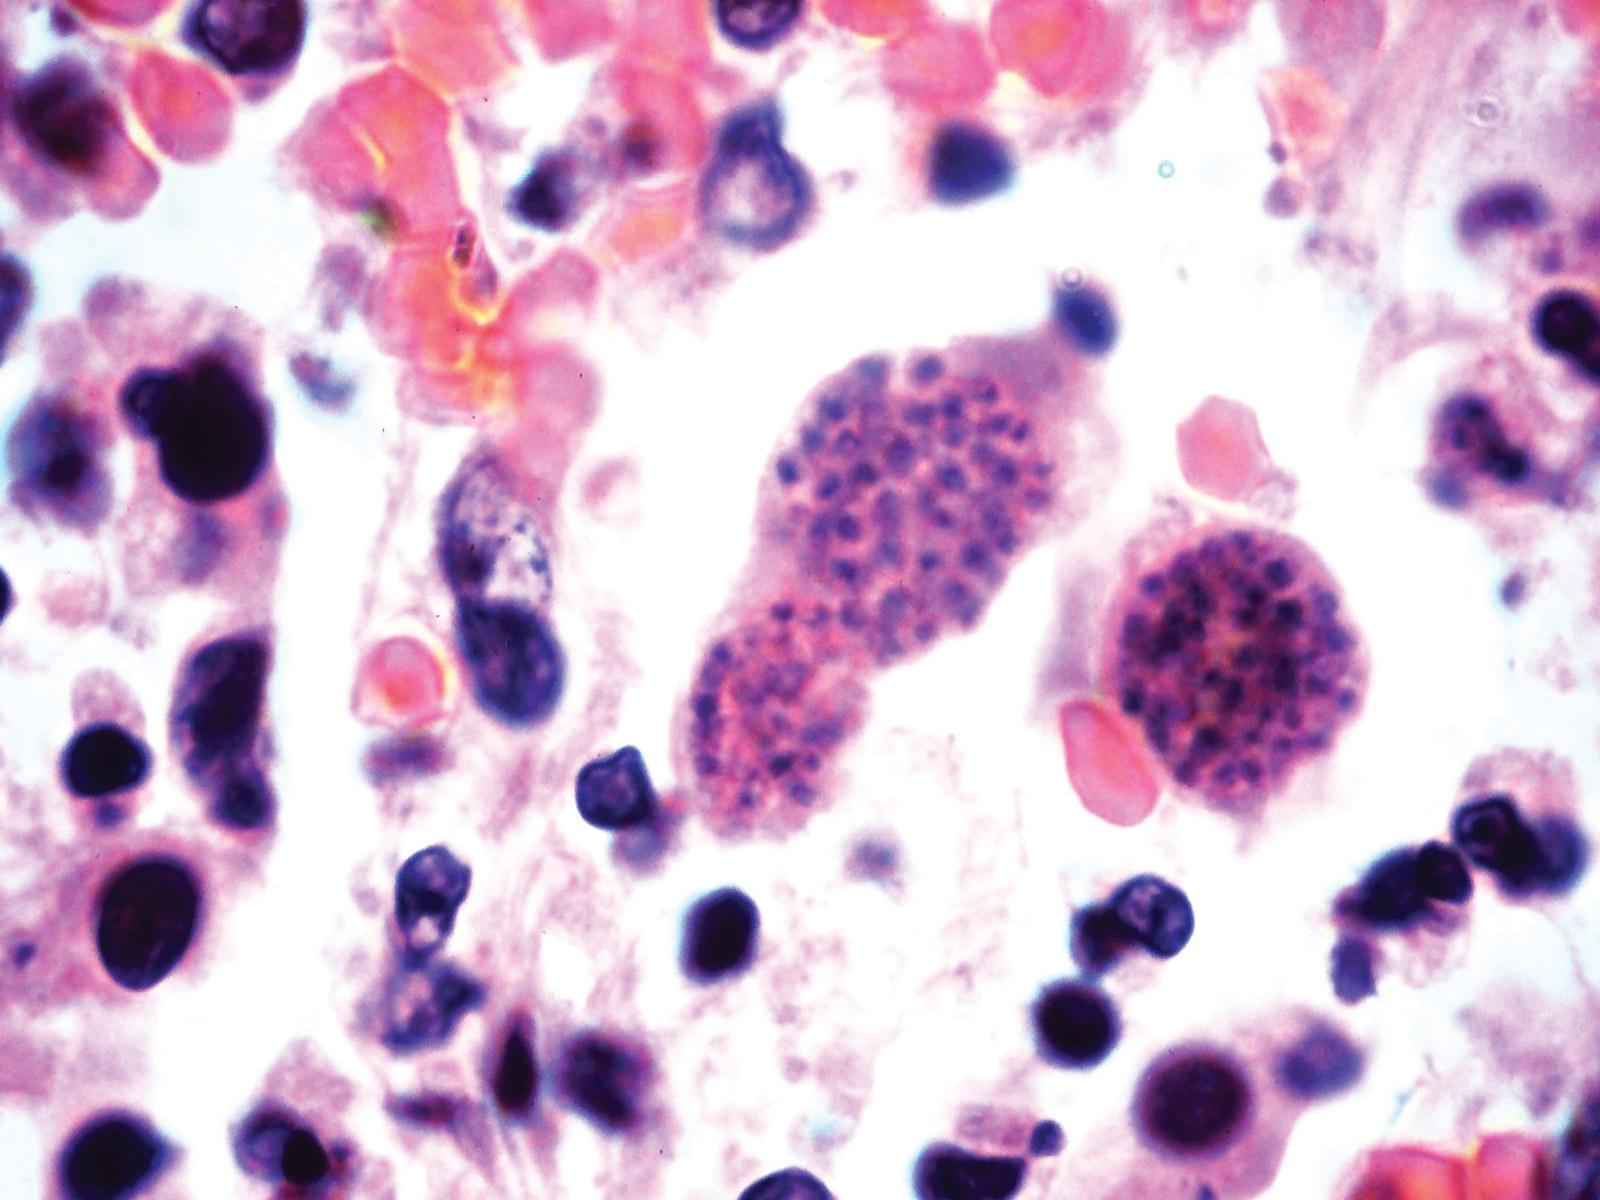 Toxoplasmosis is caused by the parasite Toxoplasma gondii. Yale Rosen/Flickr